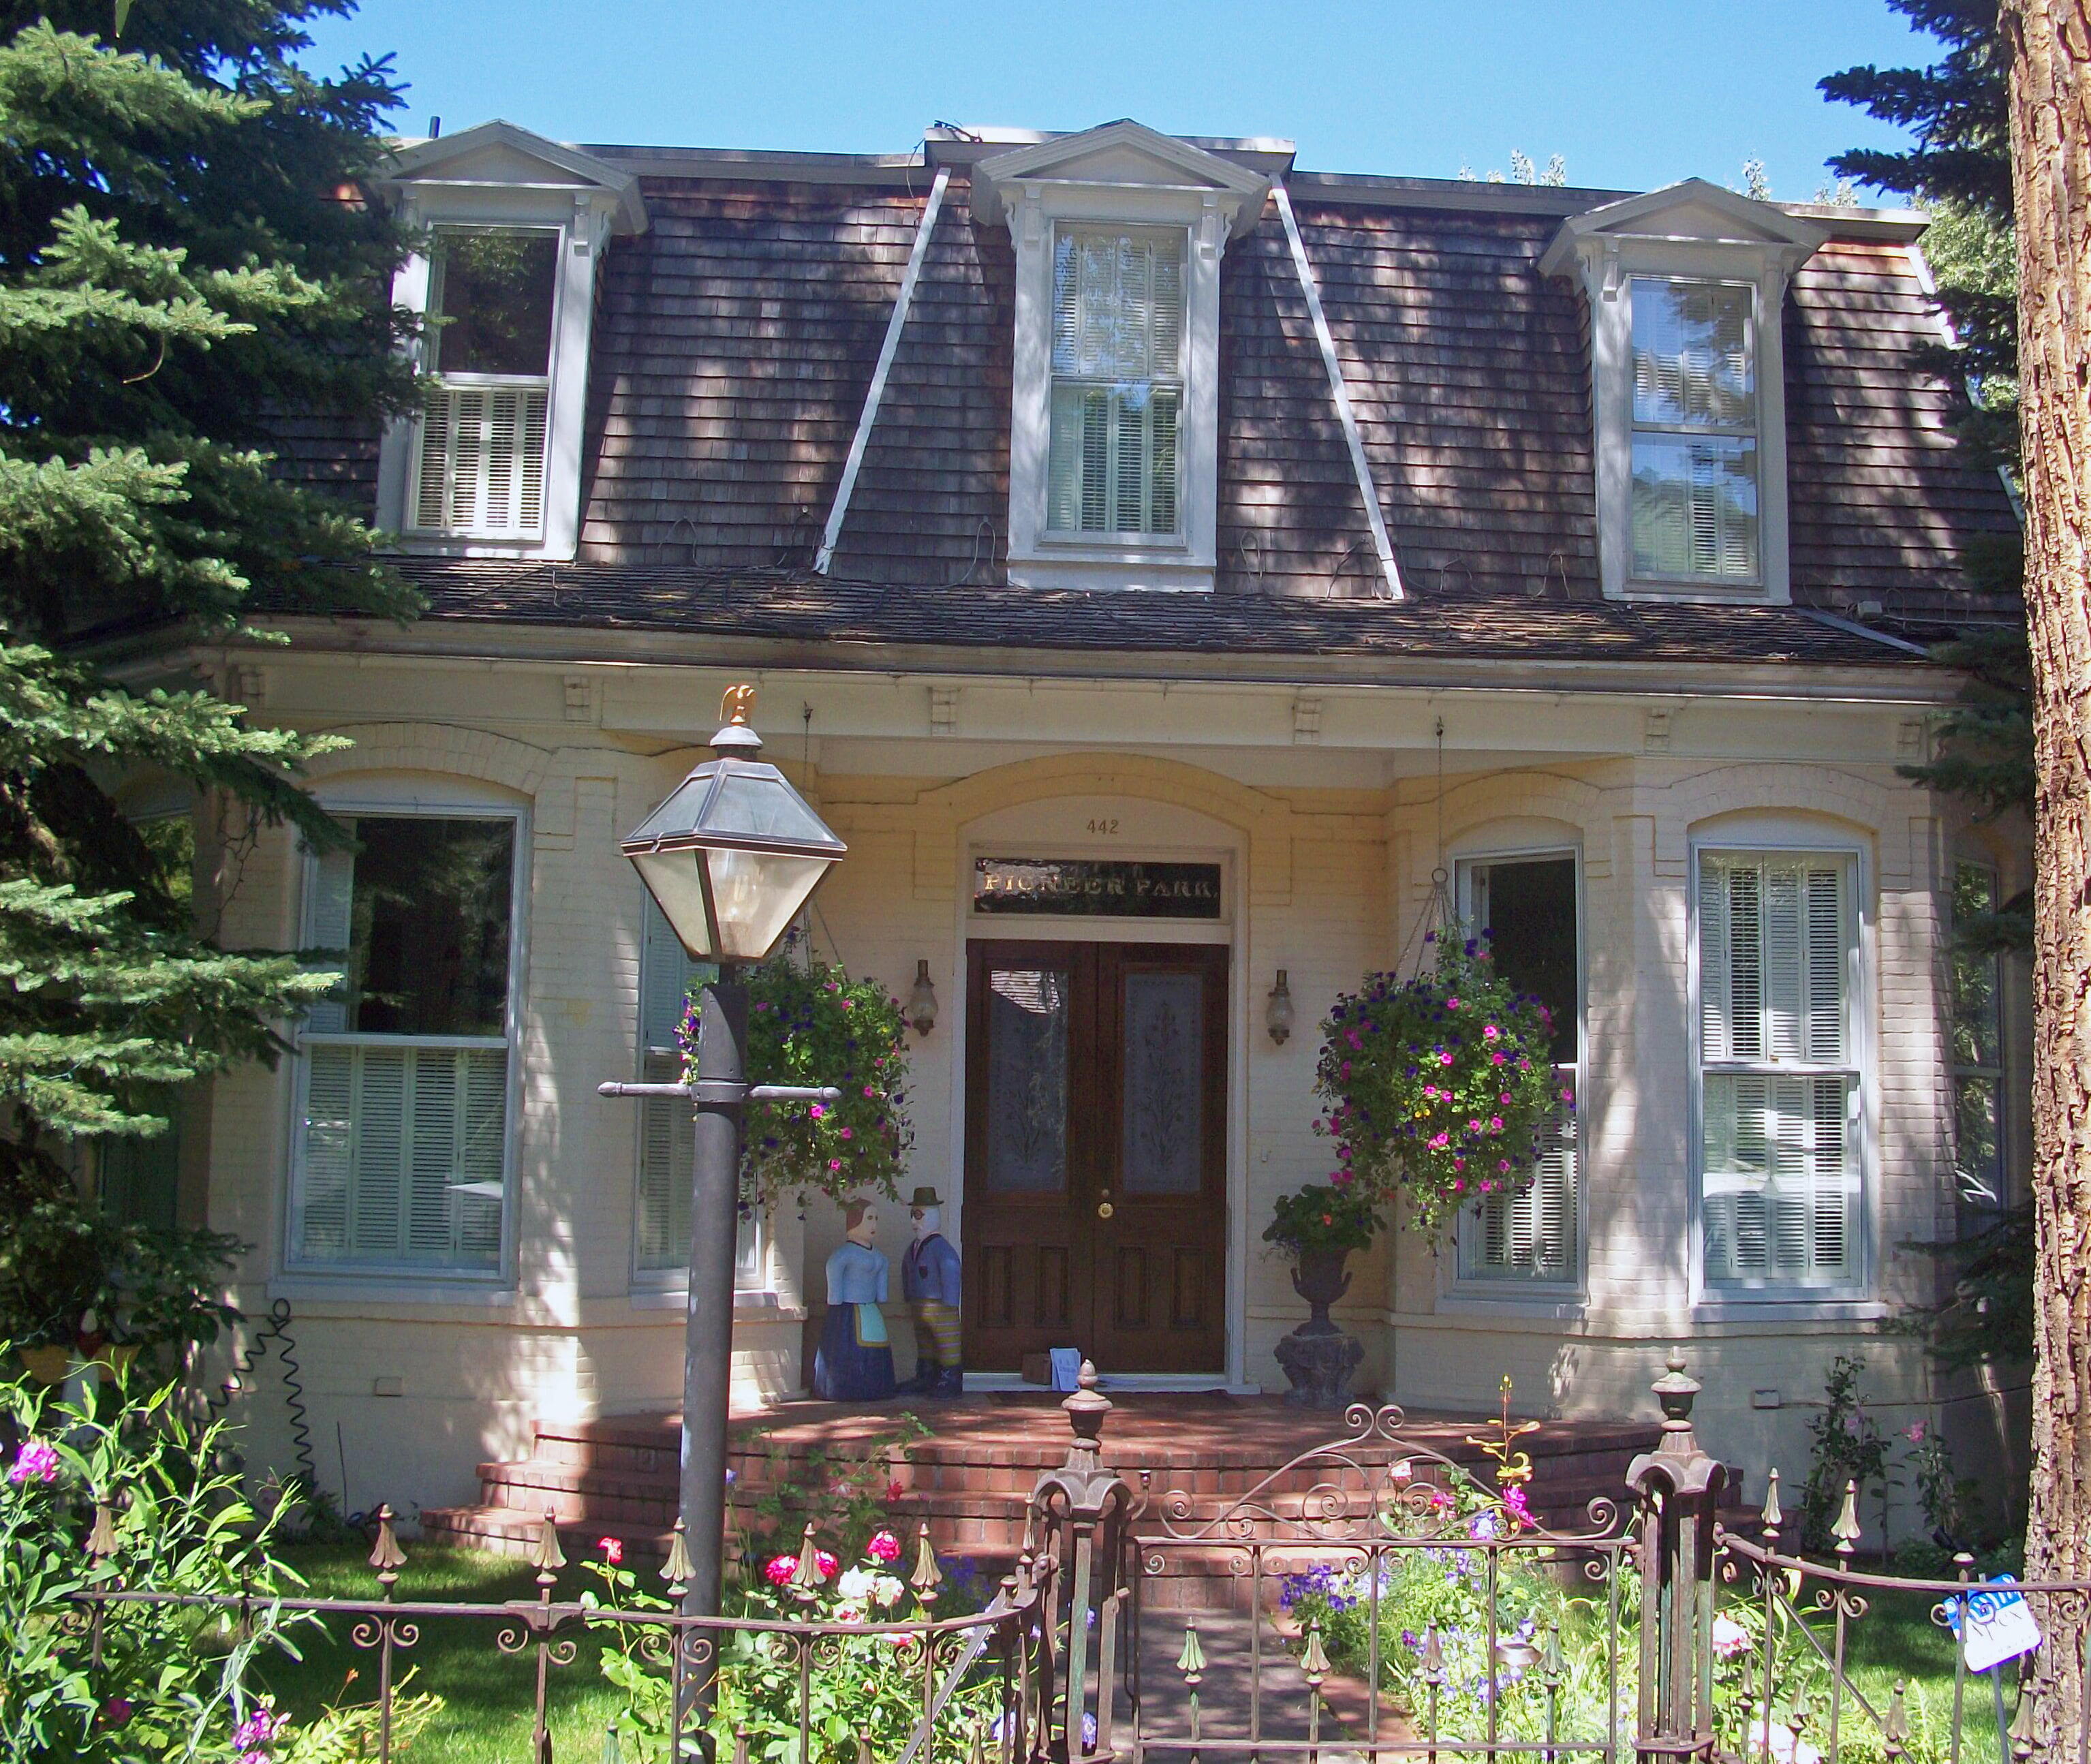 Aspen - The Henry Webber House, also known as Pioneer Park, in Aspen, CO, USA